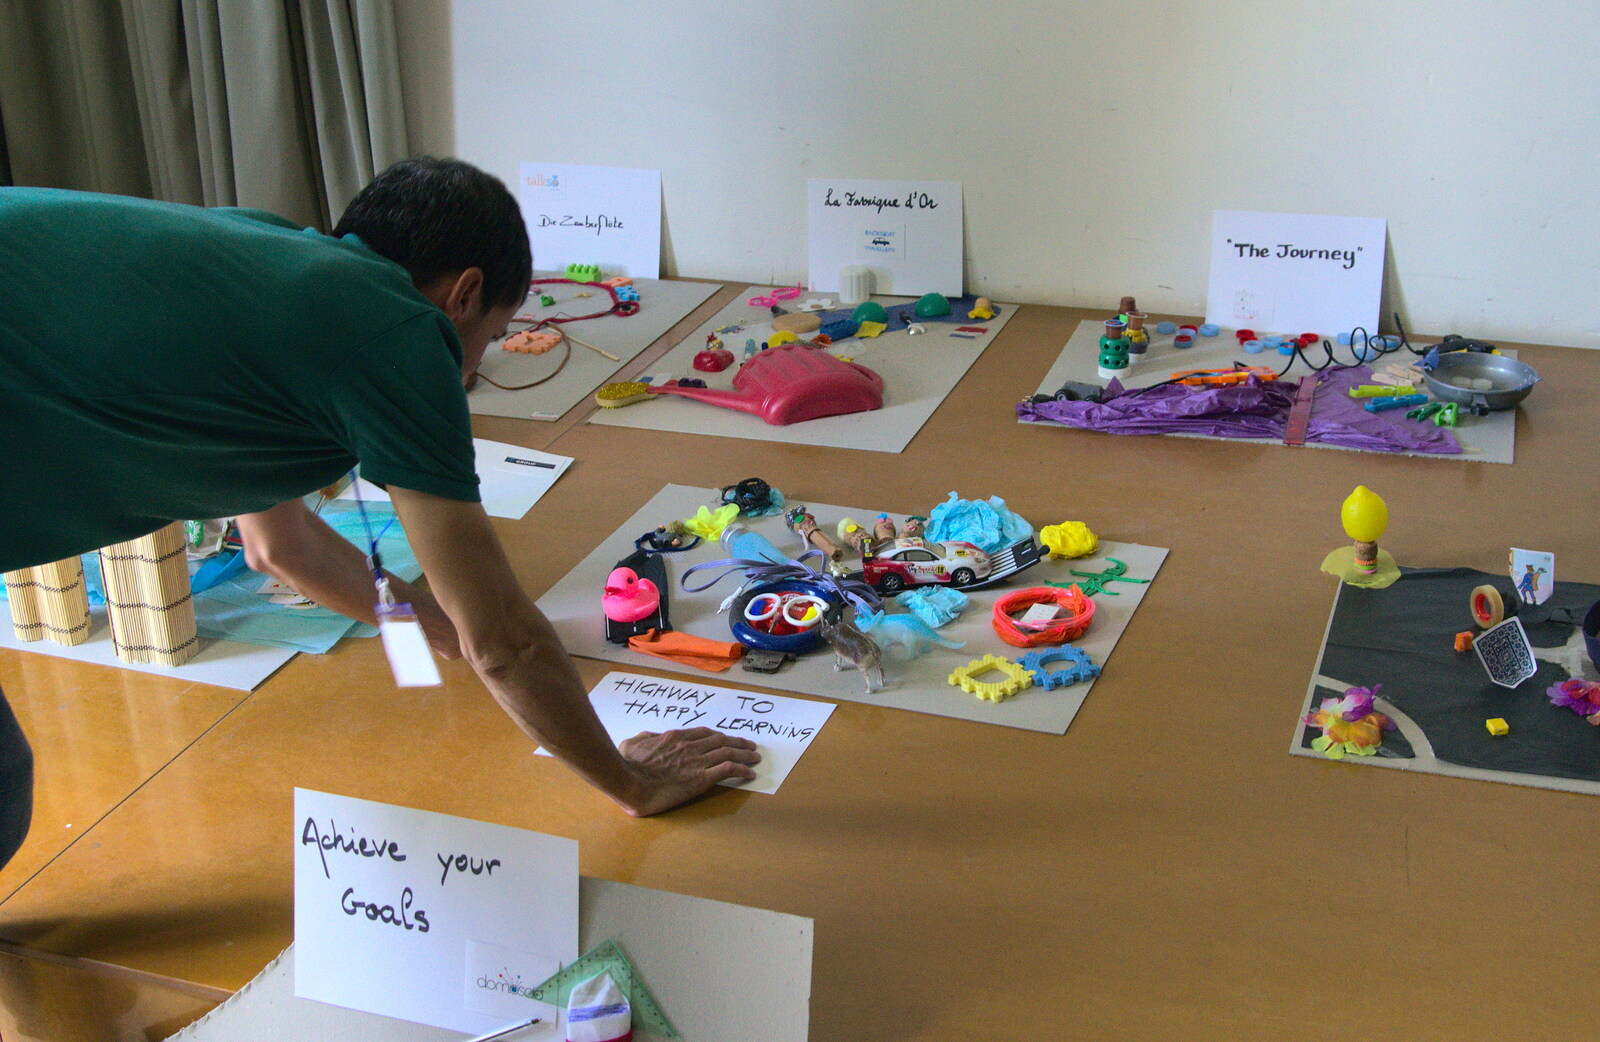 Pictures are laid out on the stage from The Open Education Challenge, Barcelona, Catalonia - 13th July 2014